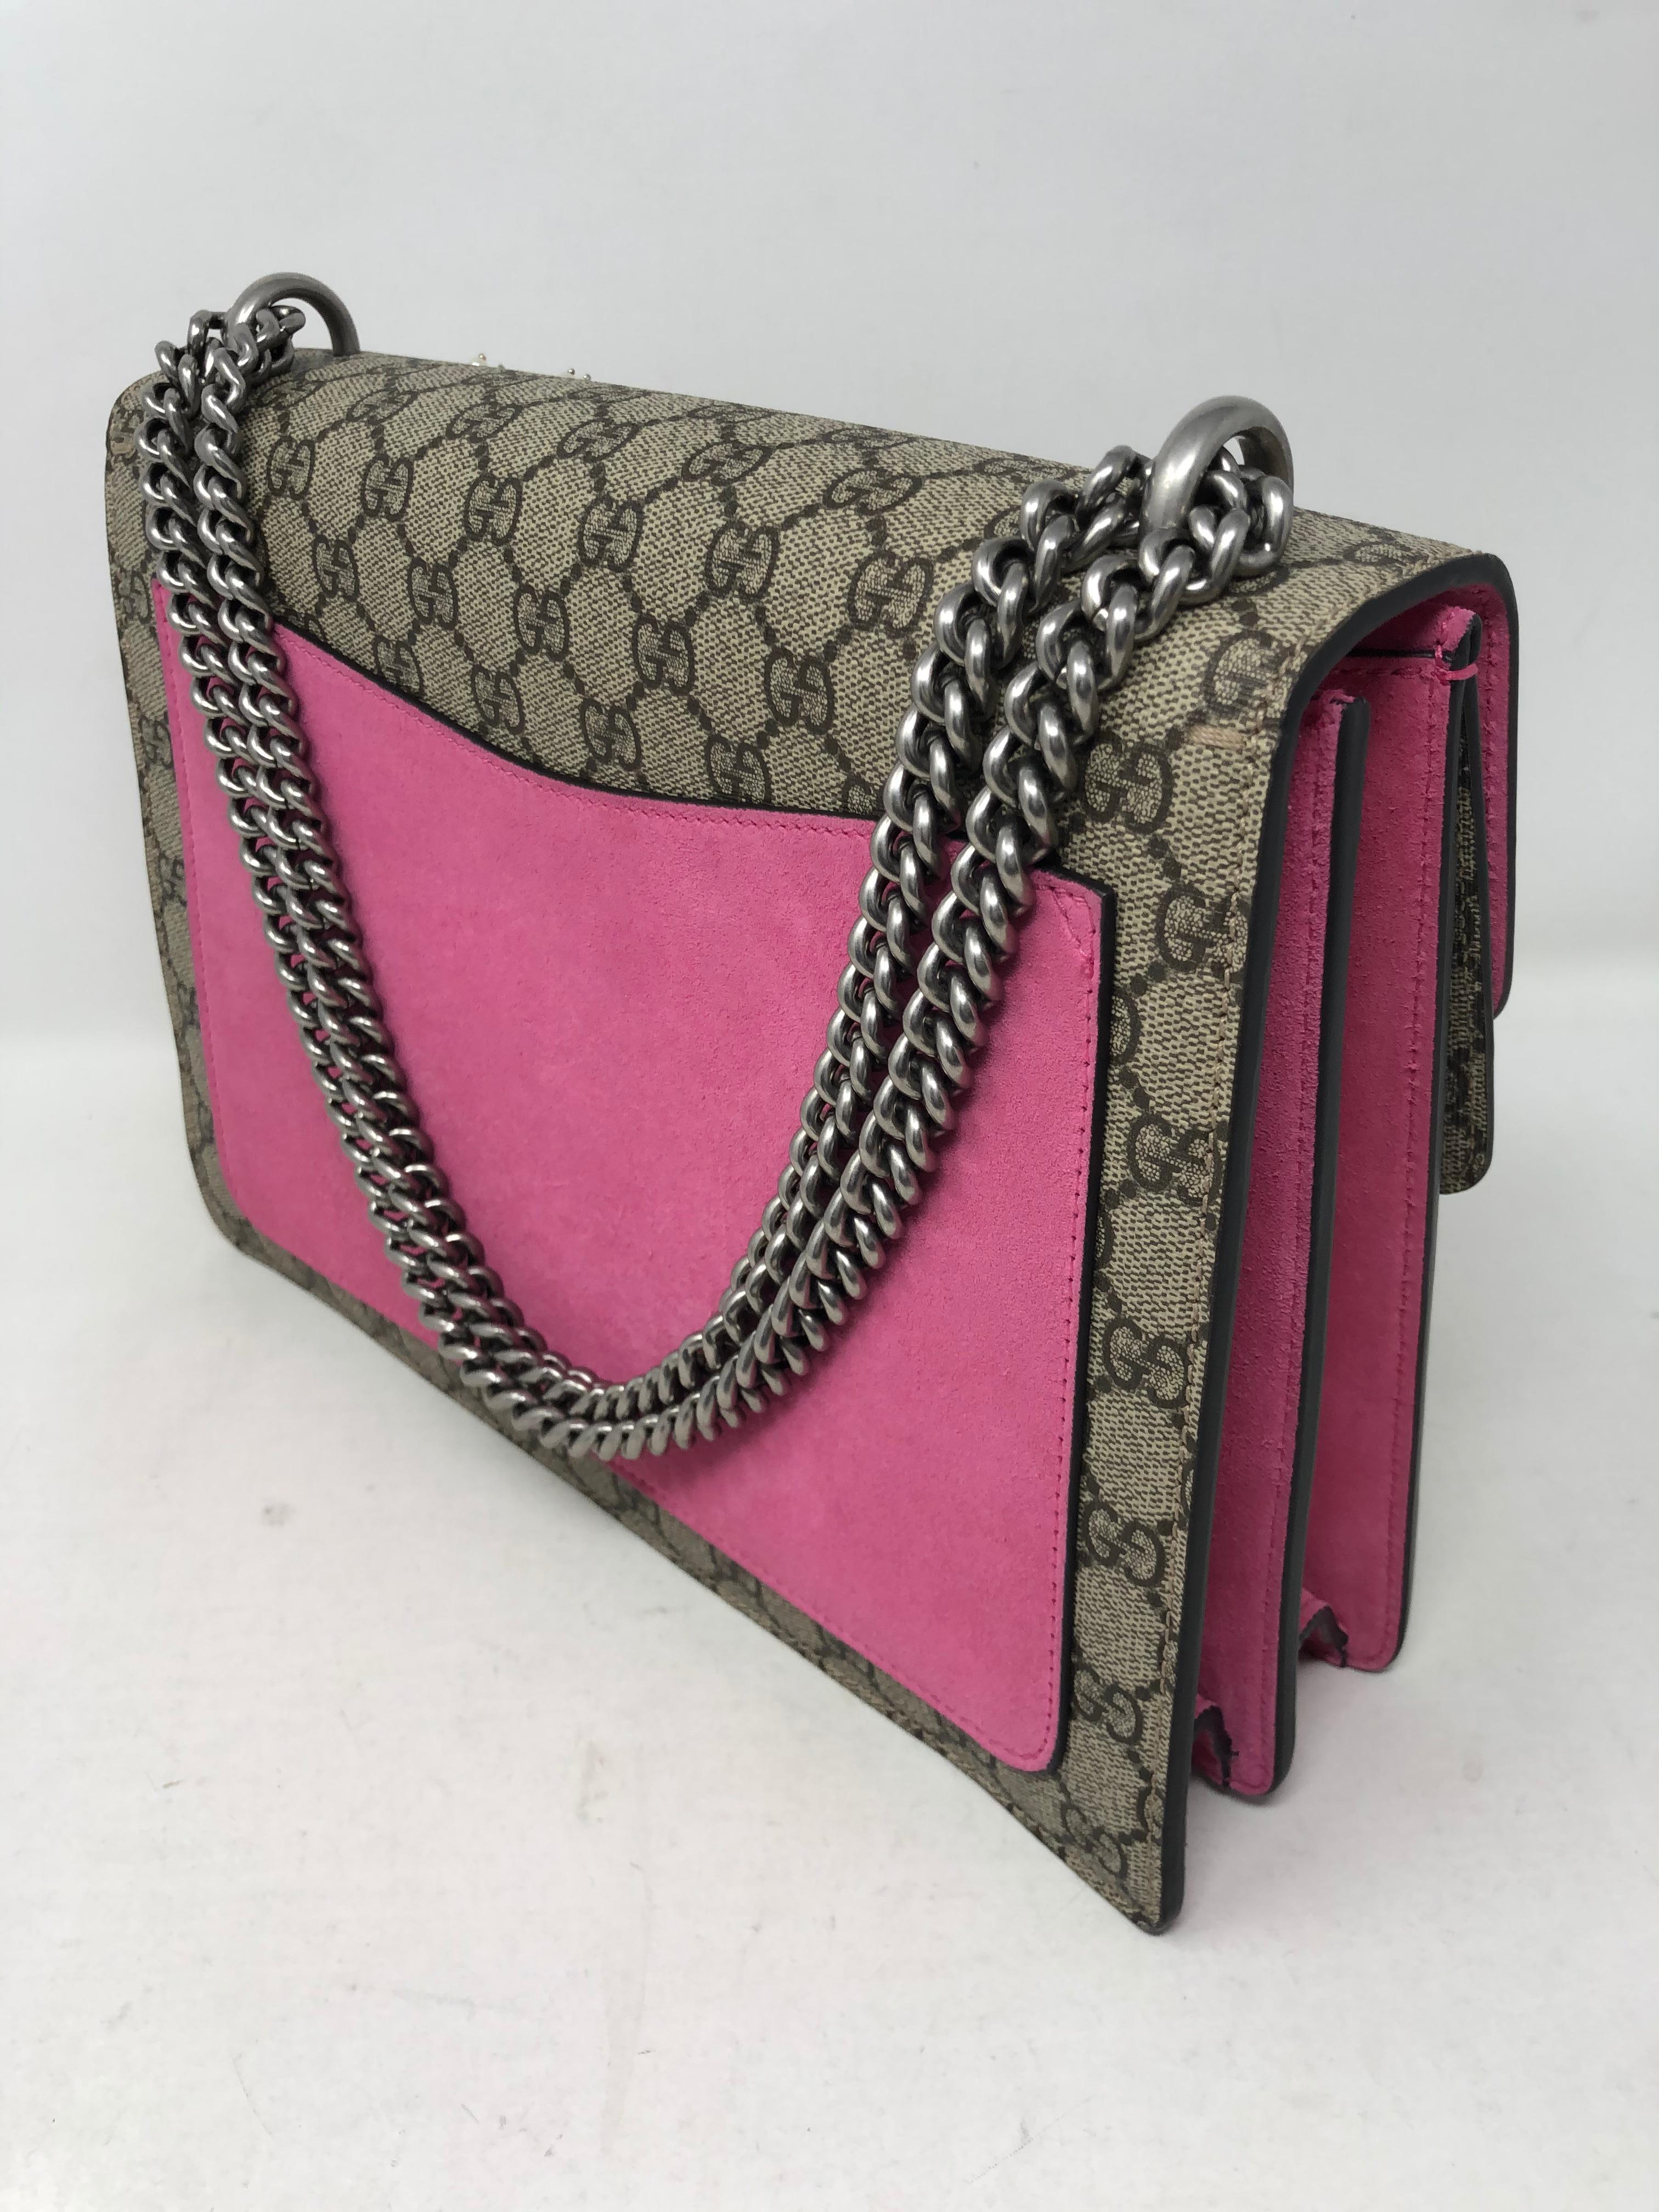 Gucci Dionysus Star, Heart, and Moon Bag with rhinestones. Limited and rare bag. Great condition. Only a few rhinestones missing. Guaranteed authentic. 